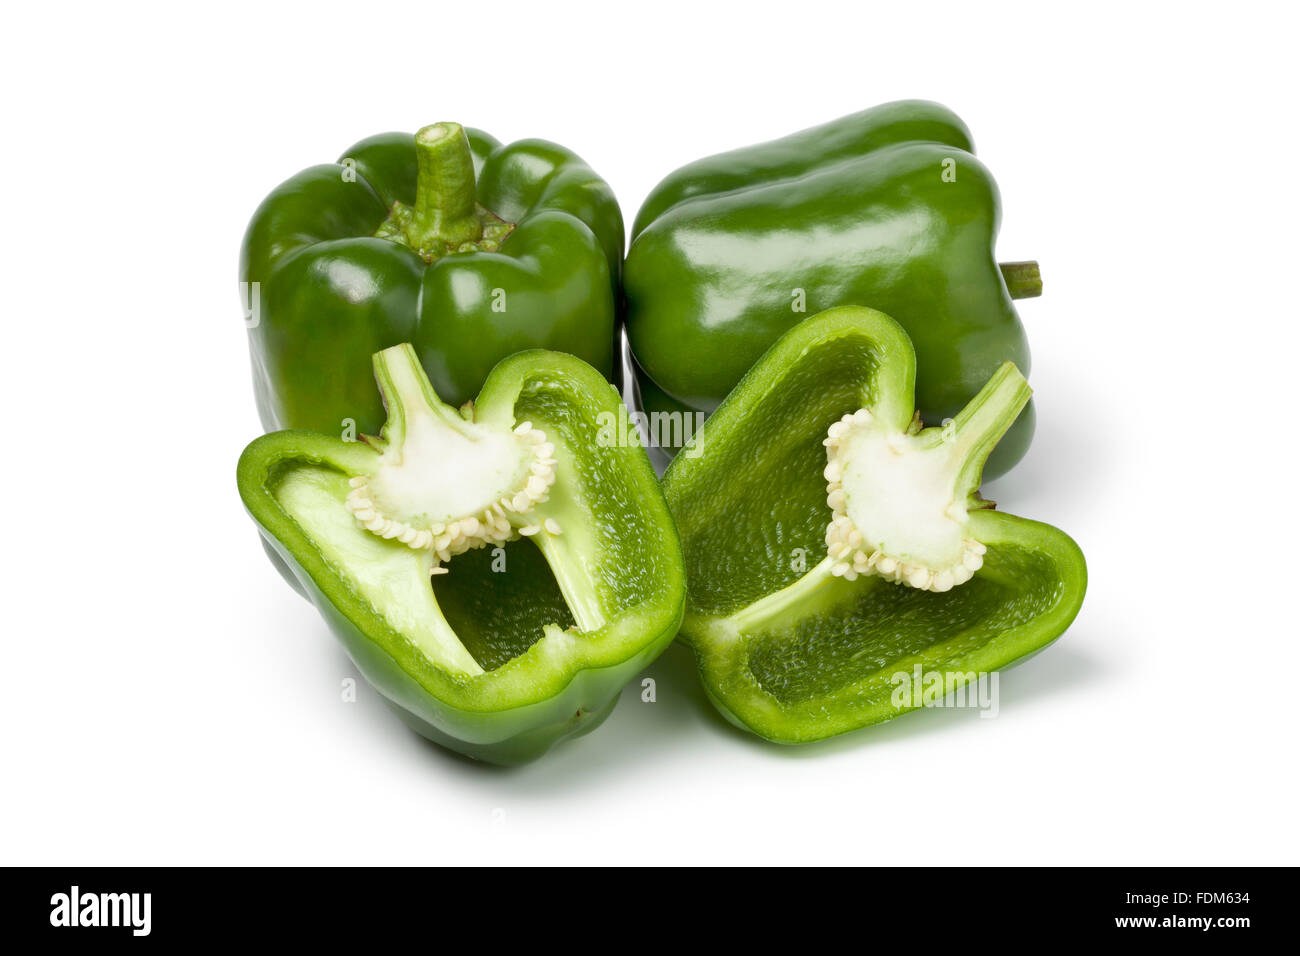 Fresh green bell peppers on white background Stock Photo